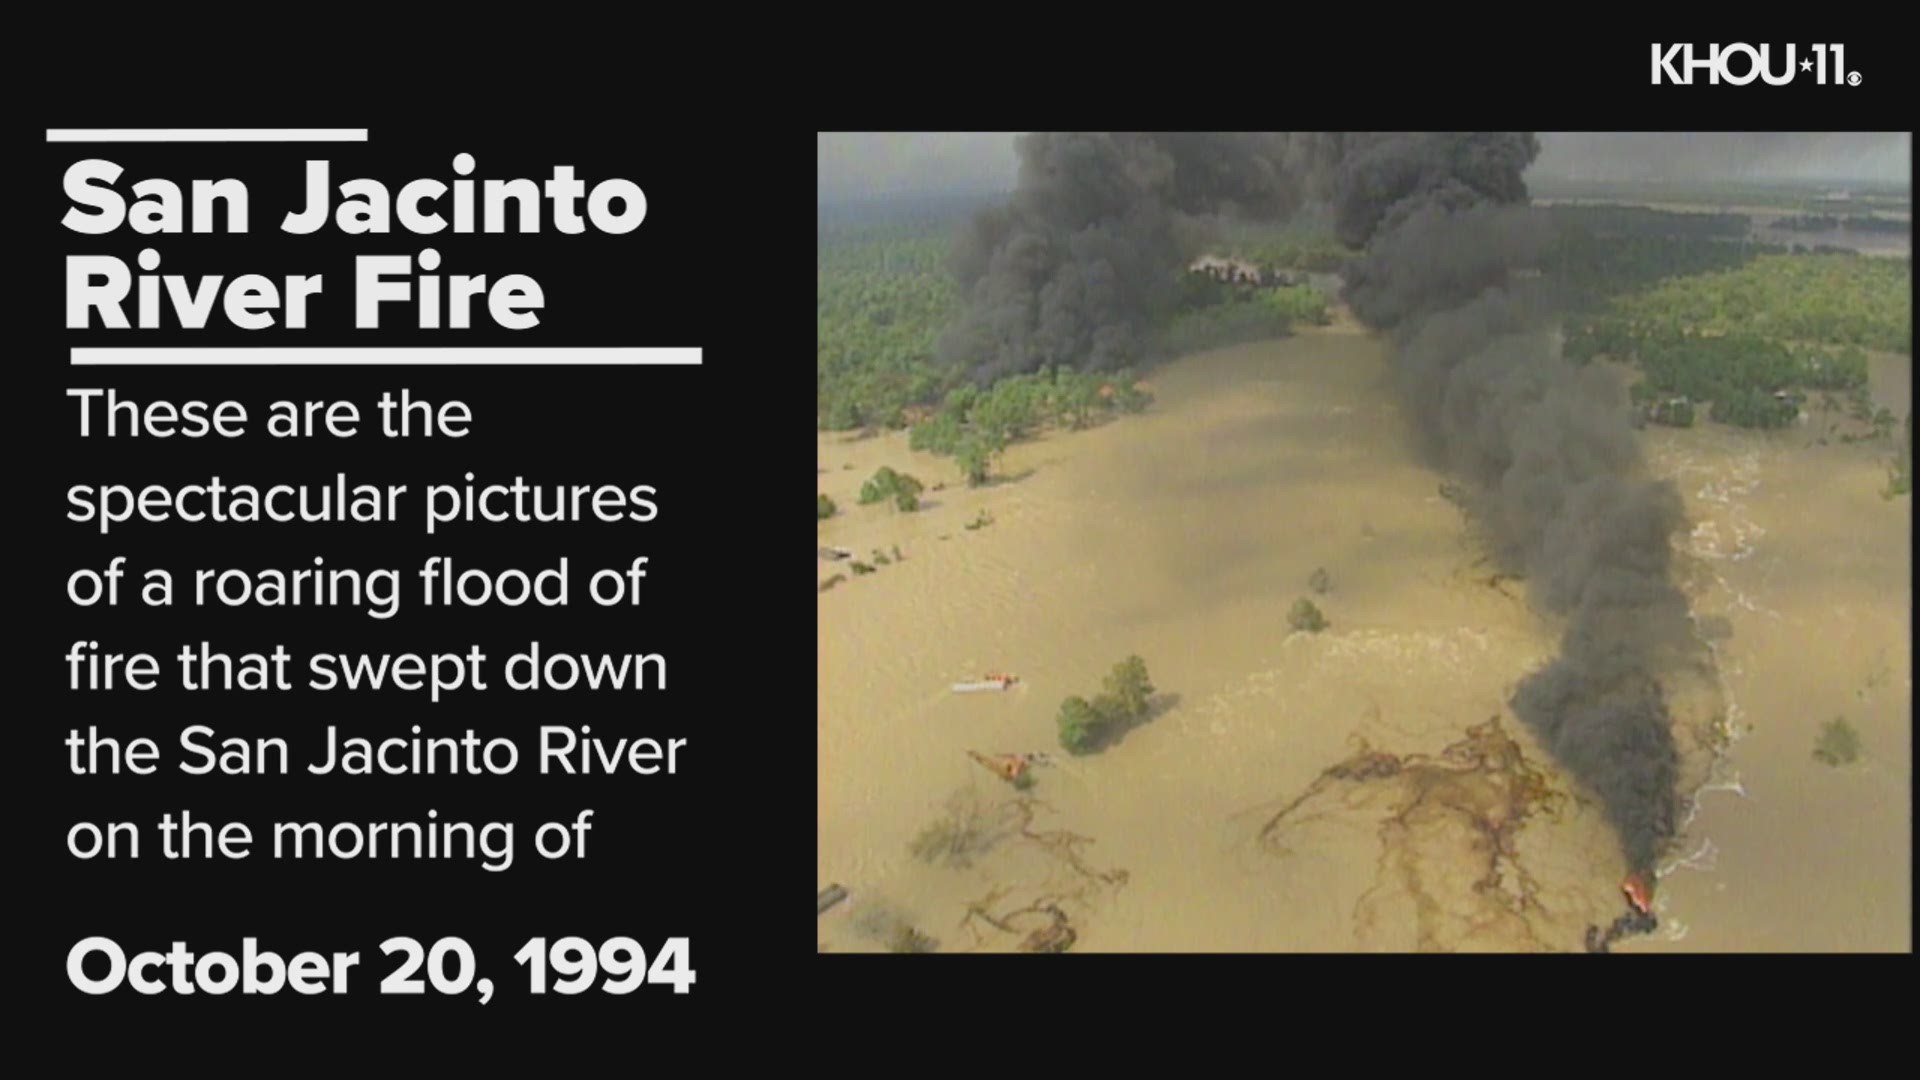 Oct. 20, 2019 marks 25 years since the devastating San Jacinto River fire that sent more than 60 people to the hospital.